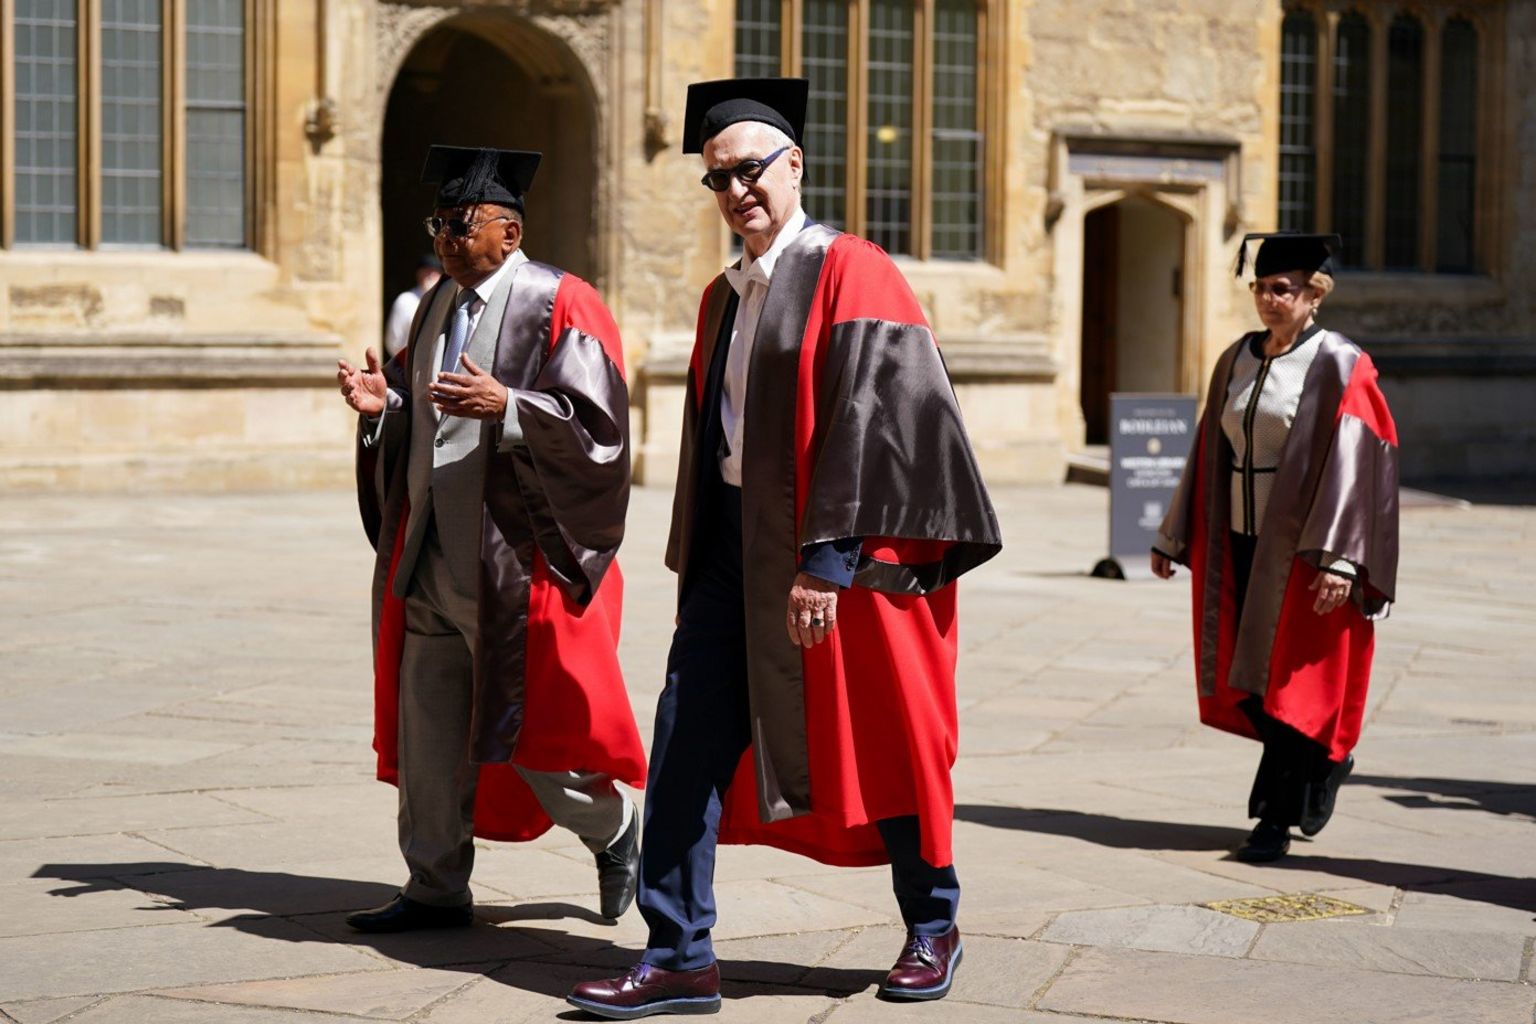 Filmmaker Wim Wenders walks in a procession ahead of receiving an honorary degree from Oxford University at a ceremony at Sheldonian Theatre, Oxford